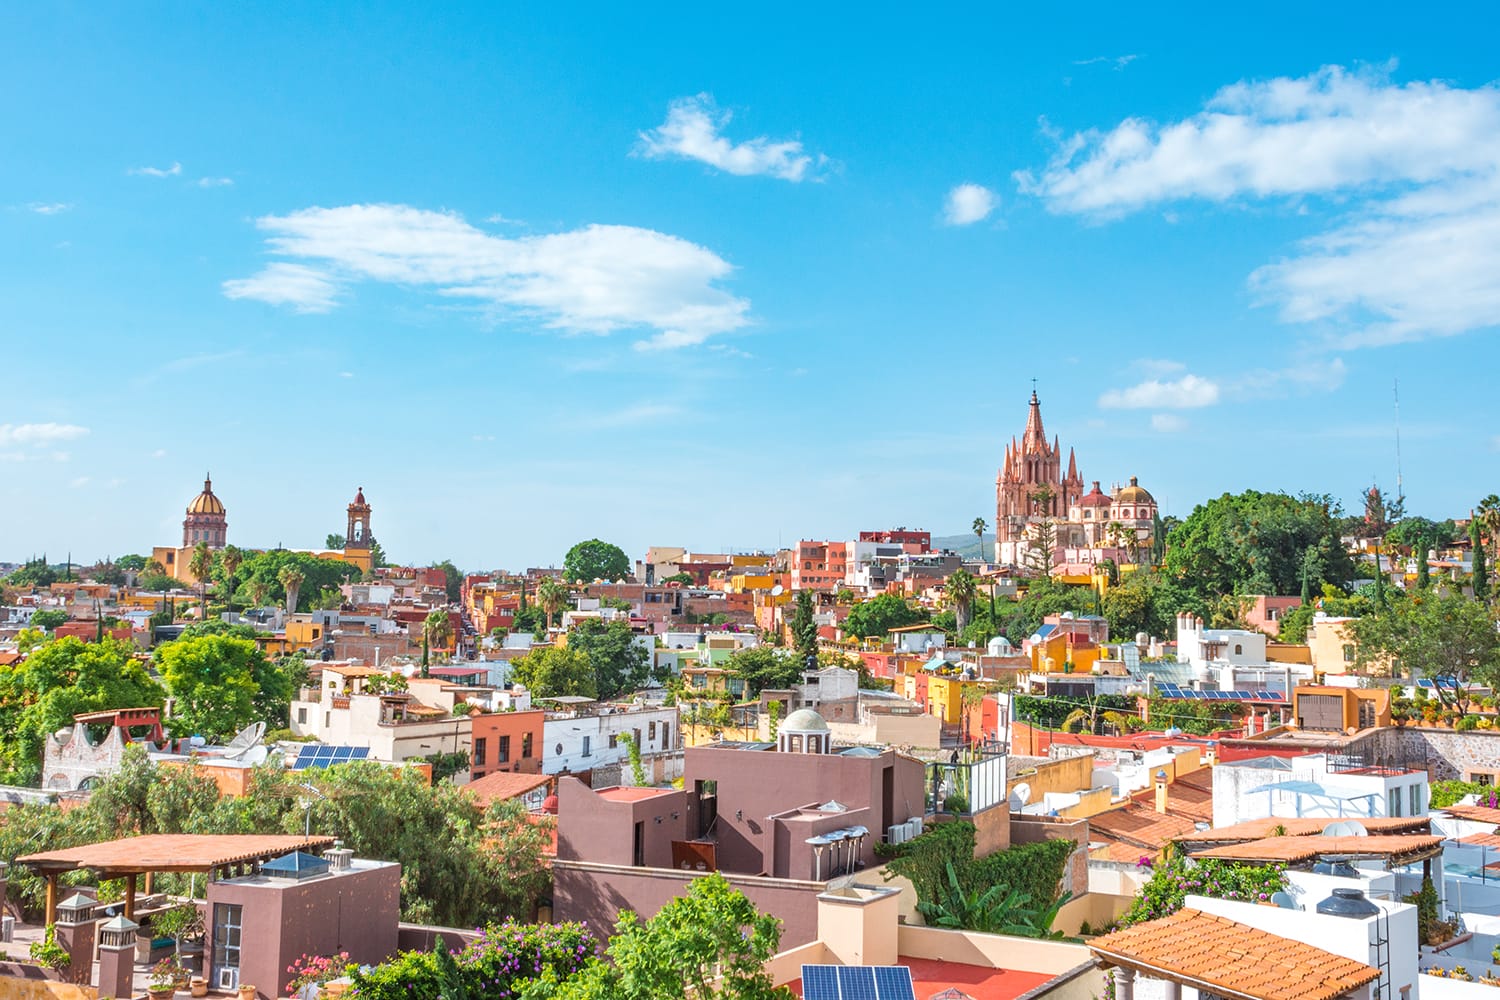 Beautiful panoramic view of San Miguel de Allende from a rooftop in Guanajuato, Mexico